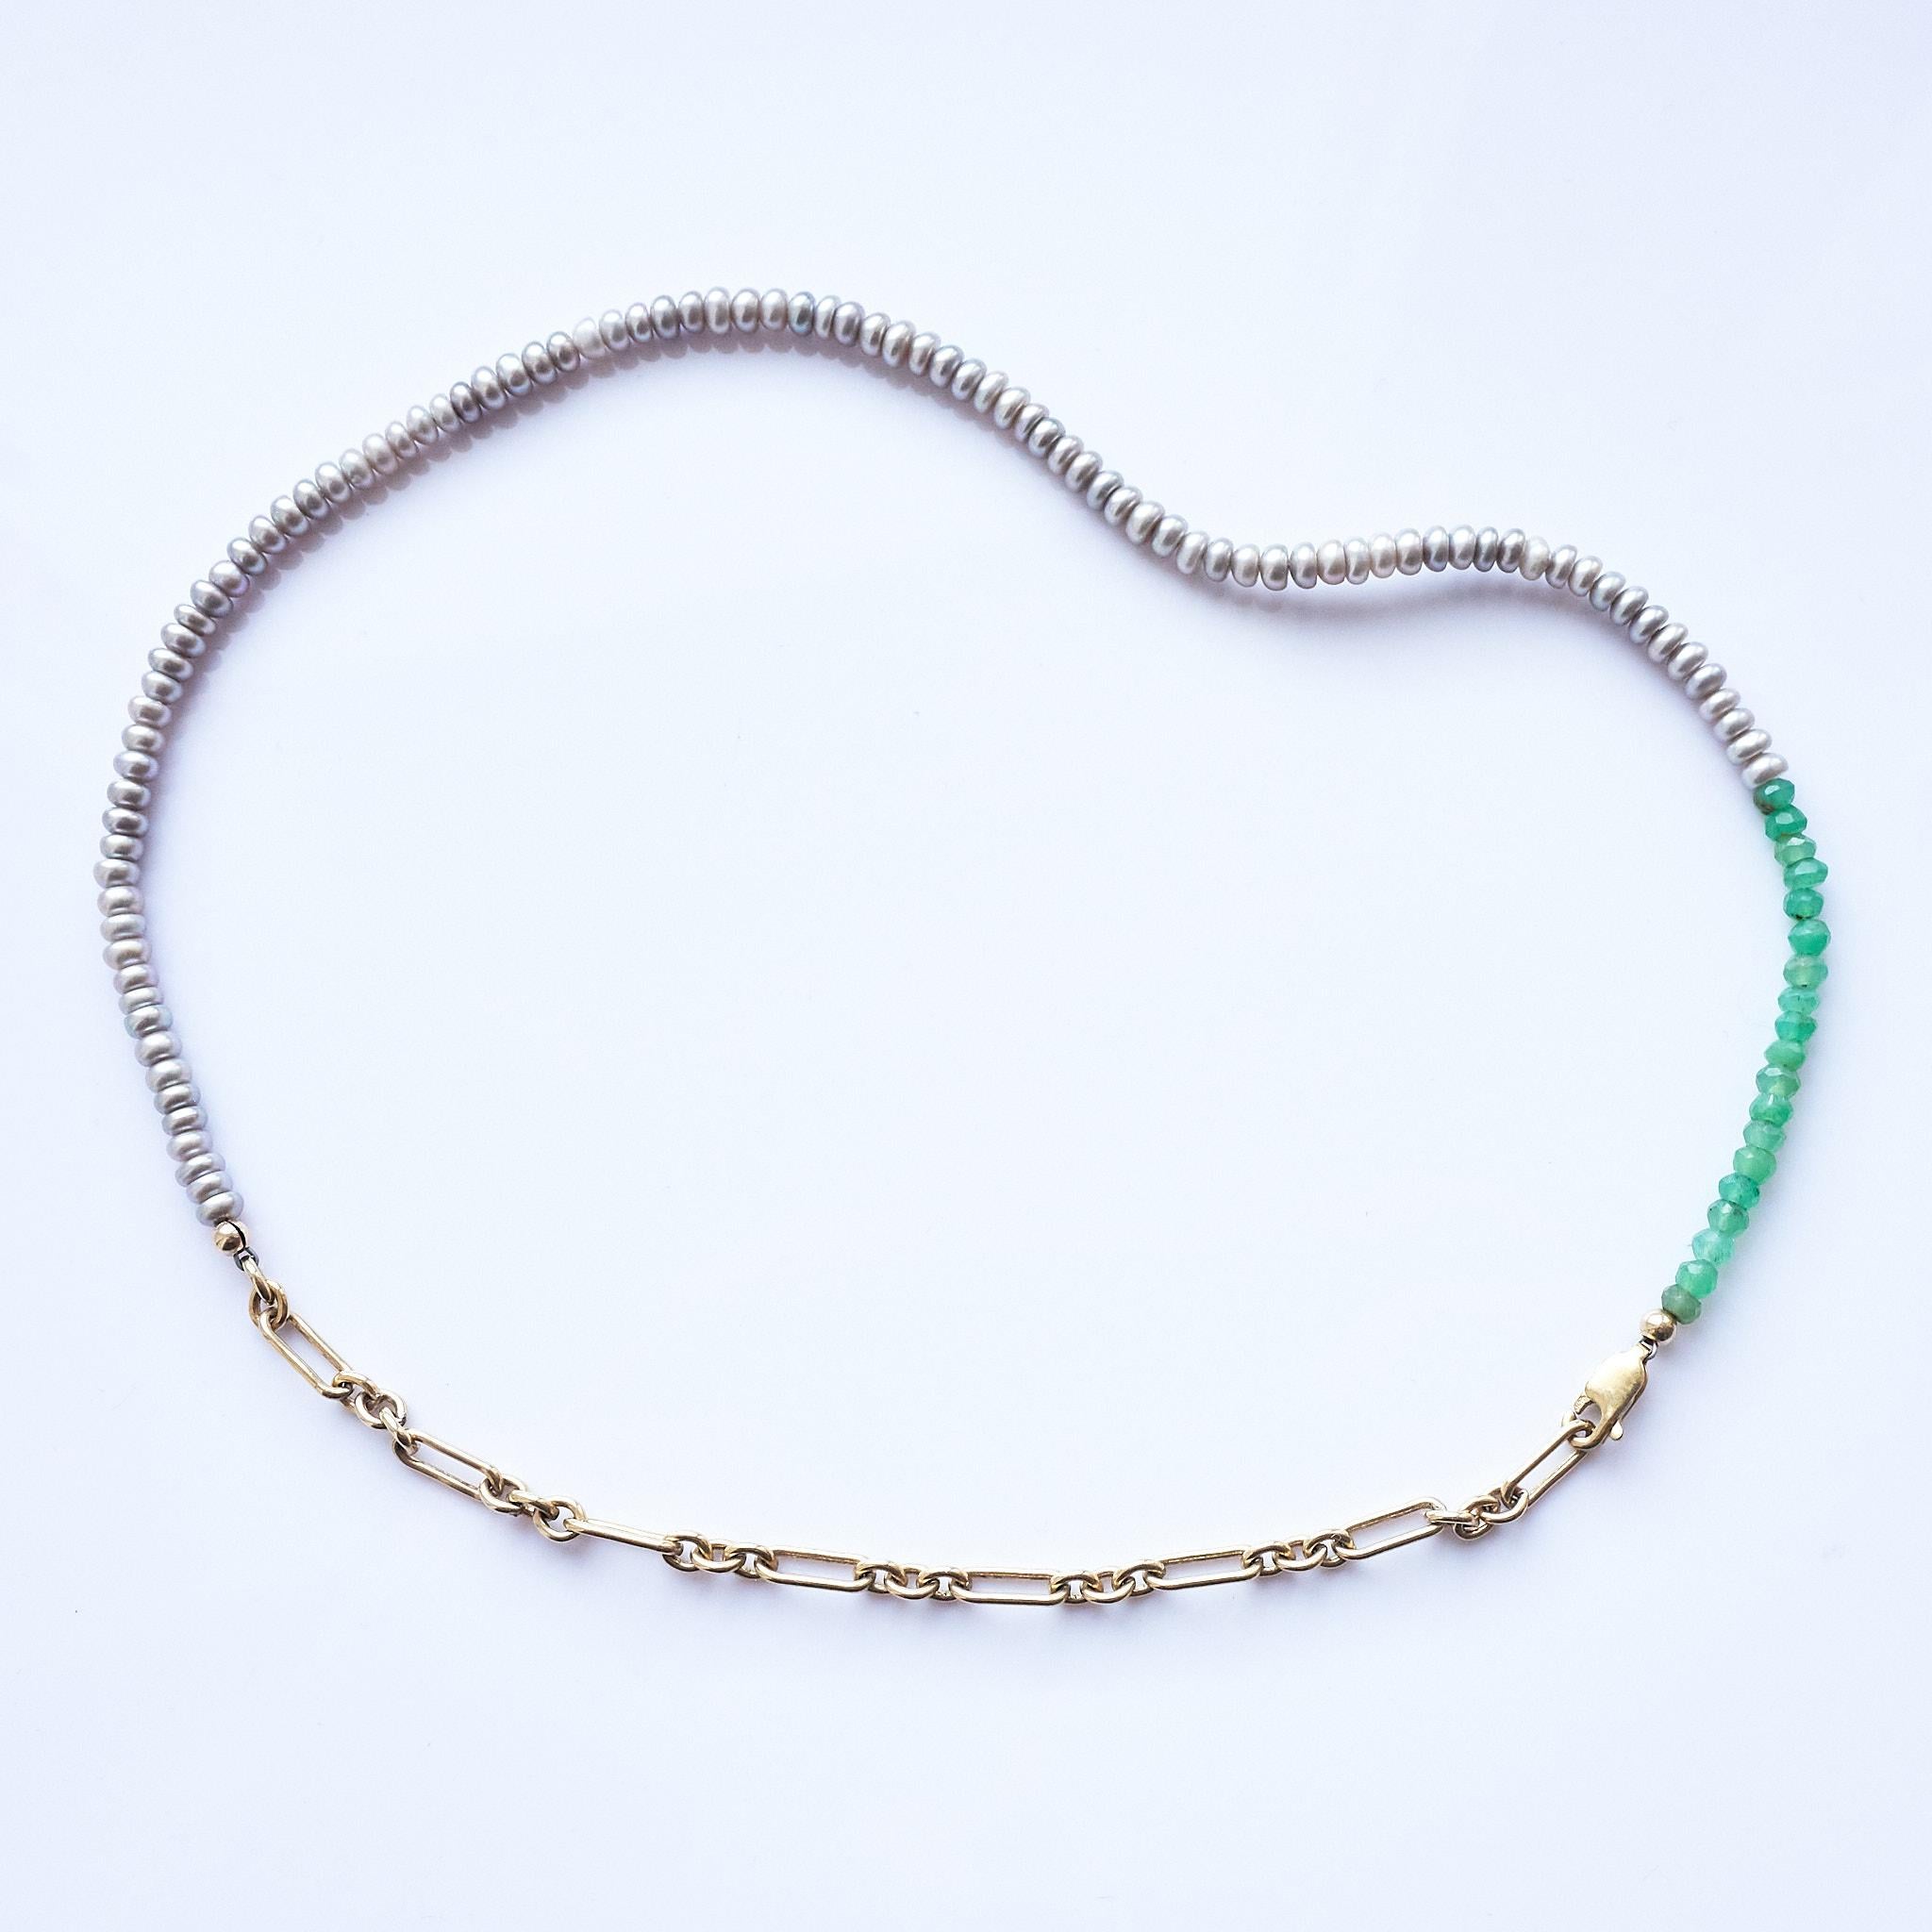 Contemporary Silver Pearl Chain Necklace Choker Beaded Chrysoprase J Dauphin For Sale